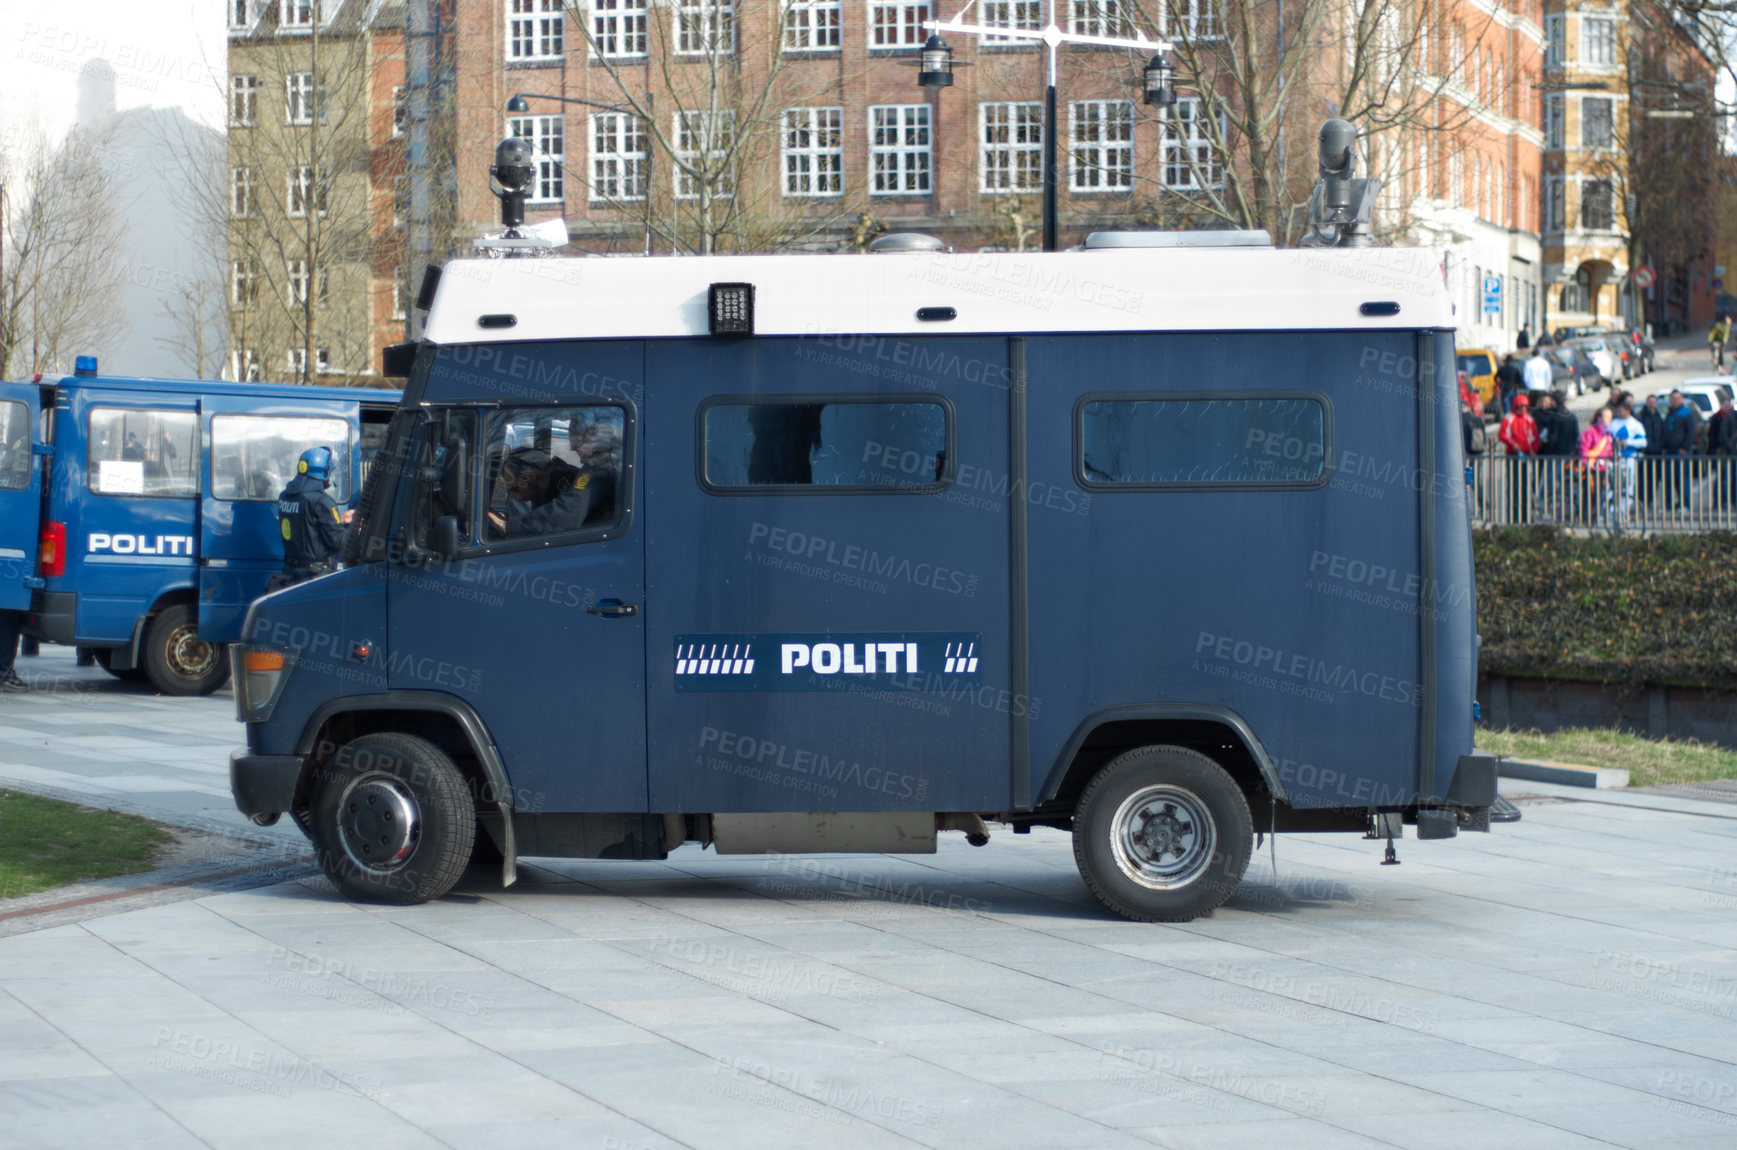 Buy stock photo Police, van and city for transport, safety or protection service for public justice in in street. Vehicle, law enforcement and outdoor for danger, arrest and armored truck on urban road in Copenhagen